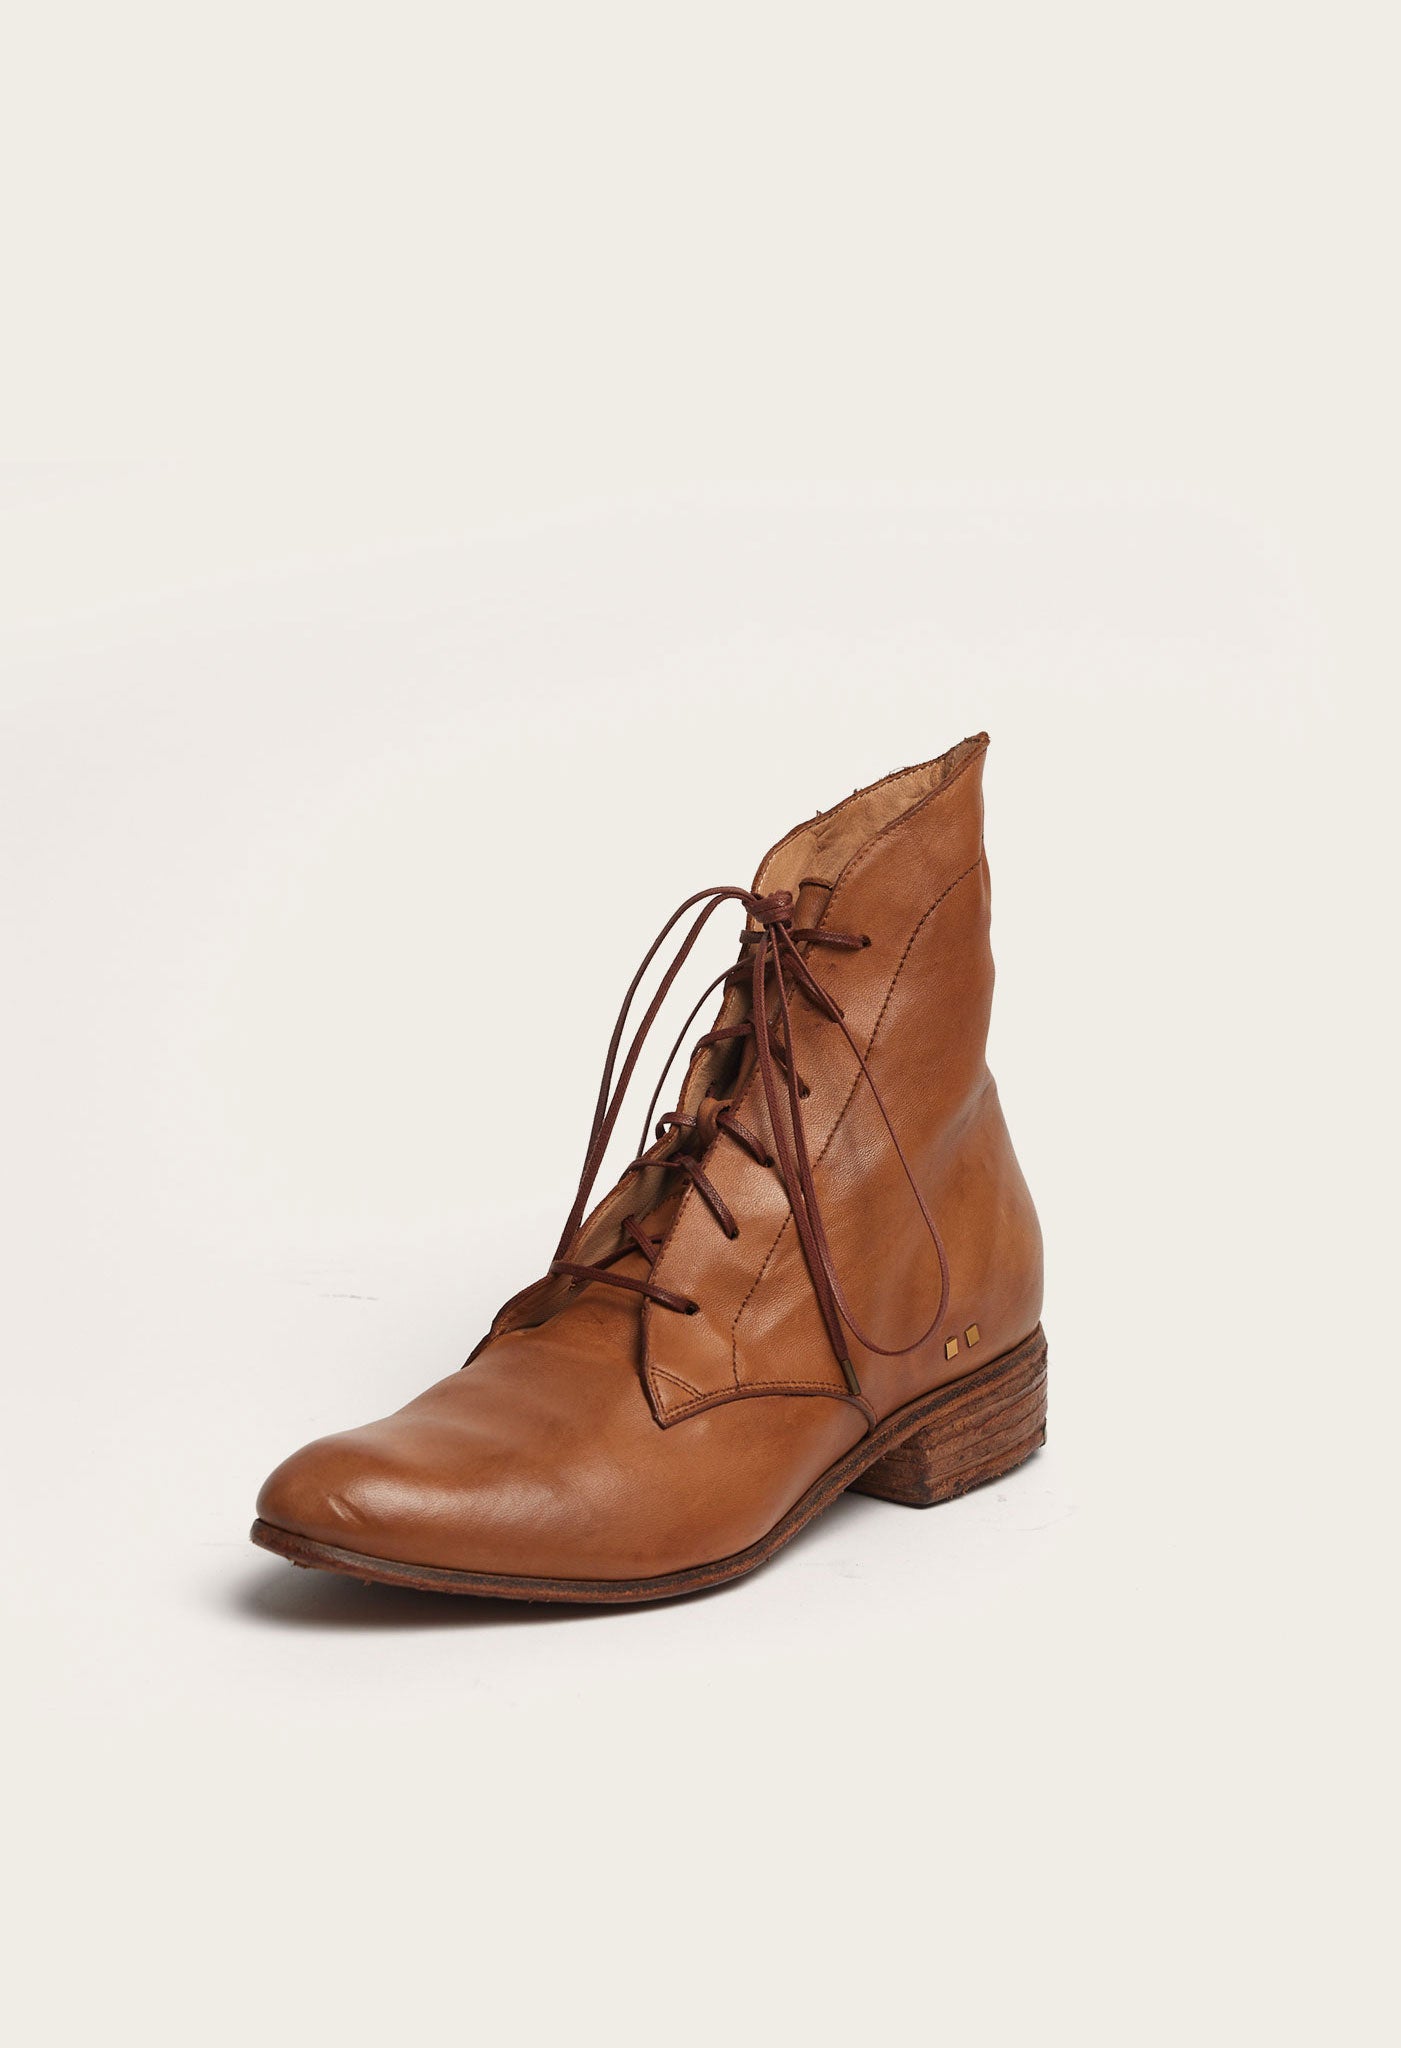 LNO The Women's Mansfield: Caramel Leather Size W38 (Worn for Photography/Stylist Loan)